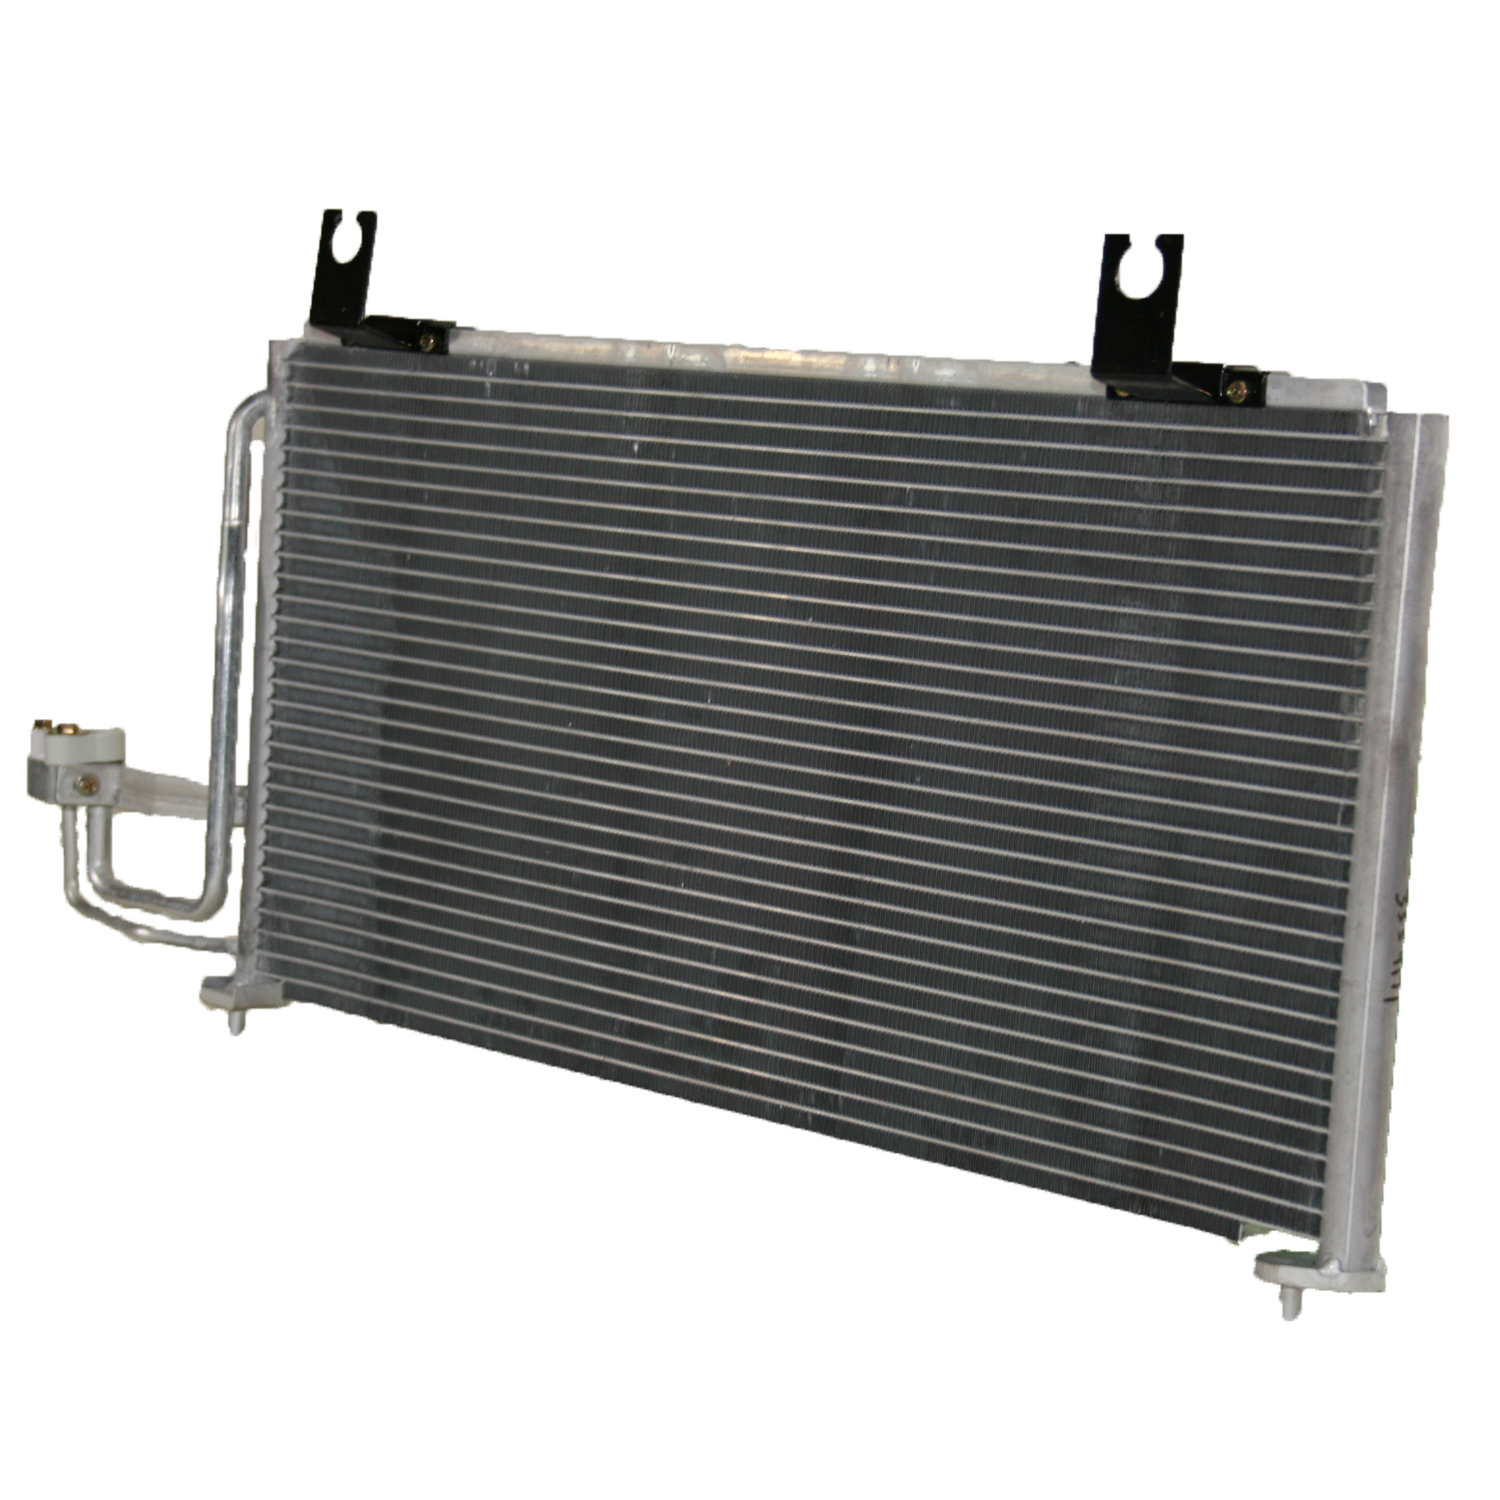 TCW Condenser 44-3067 New Product Image field_60b6a13a6e67c